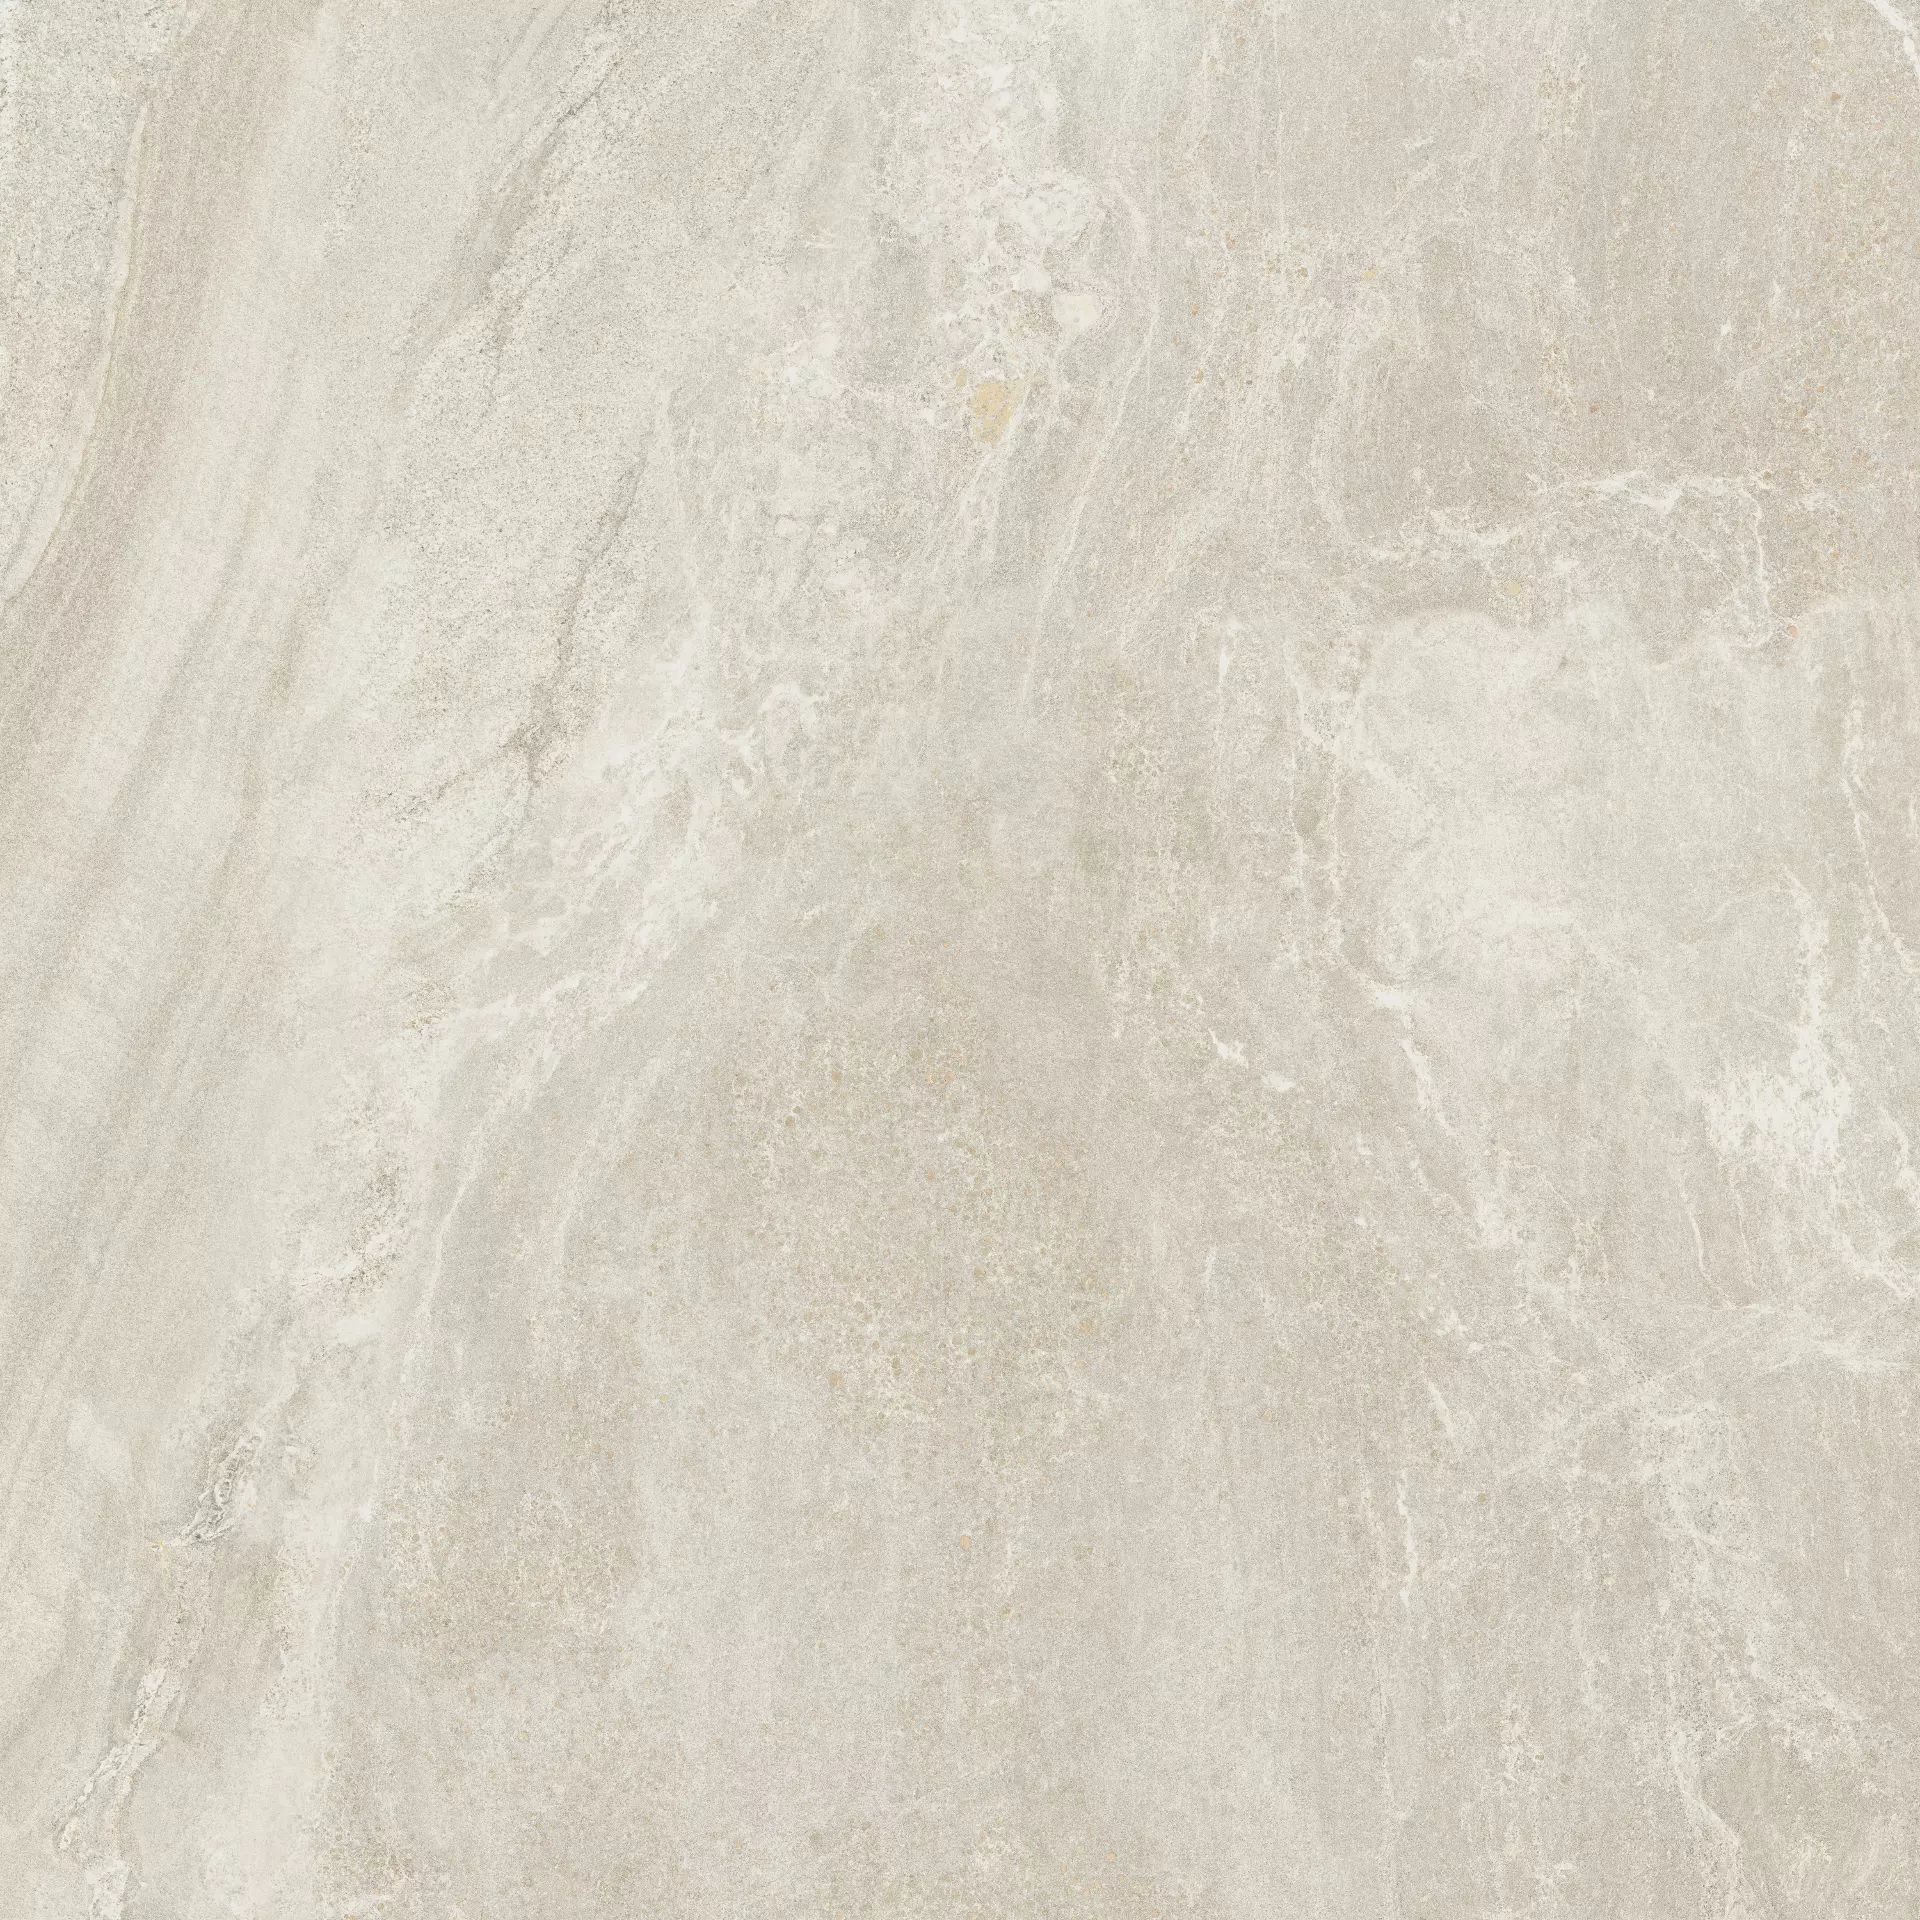 Panaria The Place Midtown White Antibacterial - Naturale PGGP940 90x90cm rectified 9mm